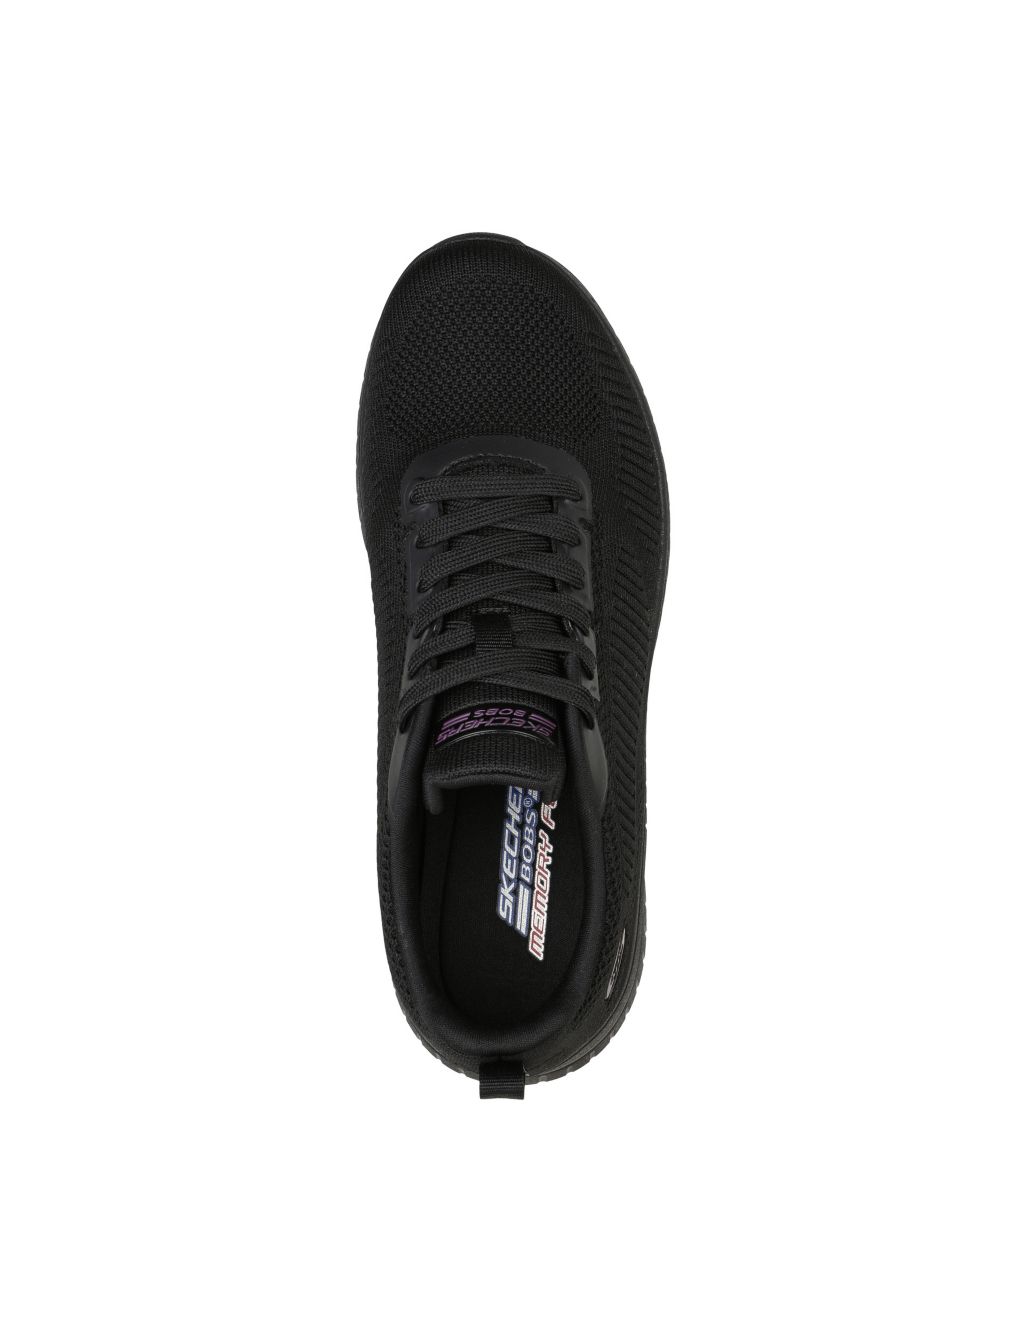 Bobs Squad Chaos Face Off Lace Up Trainers | Skechers | M&S